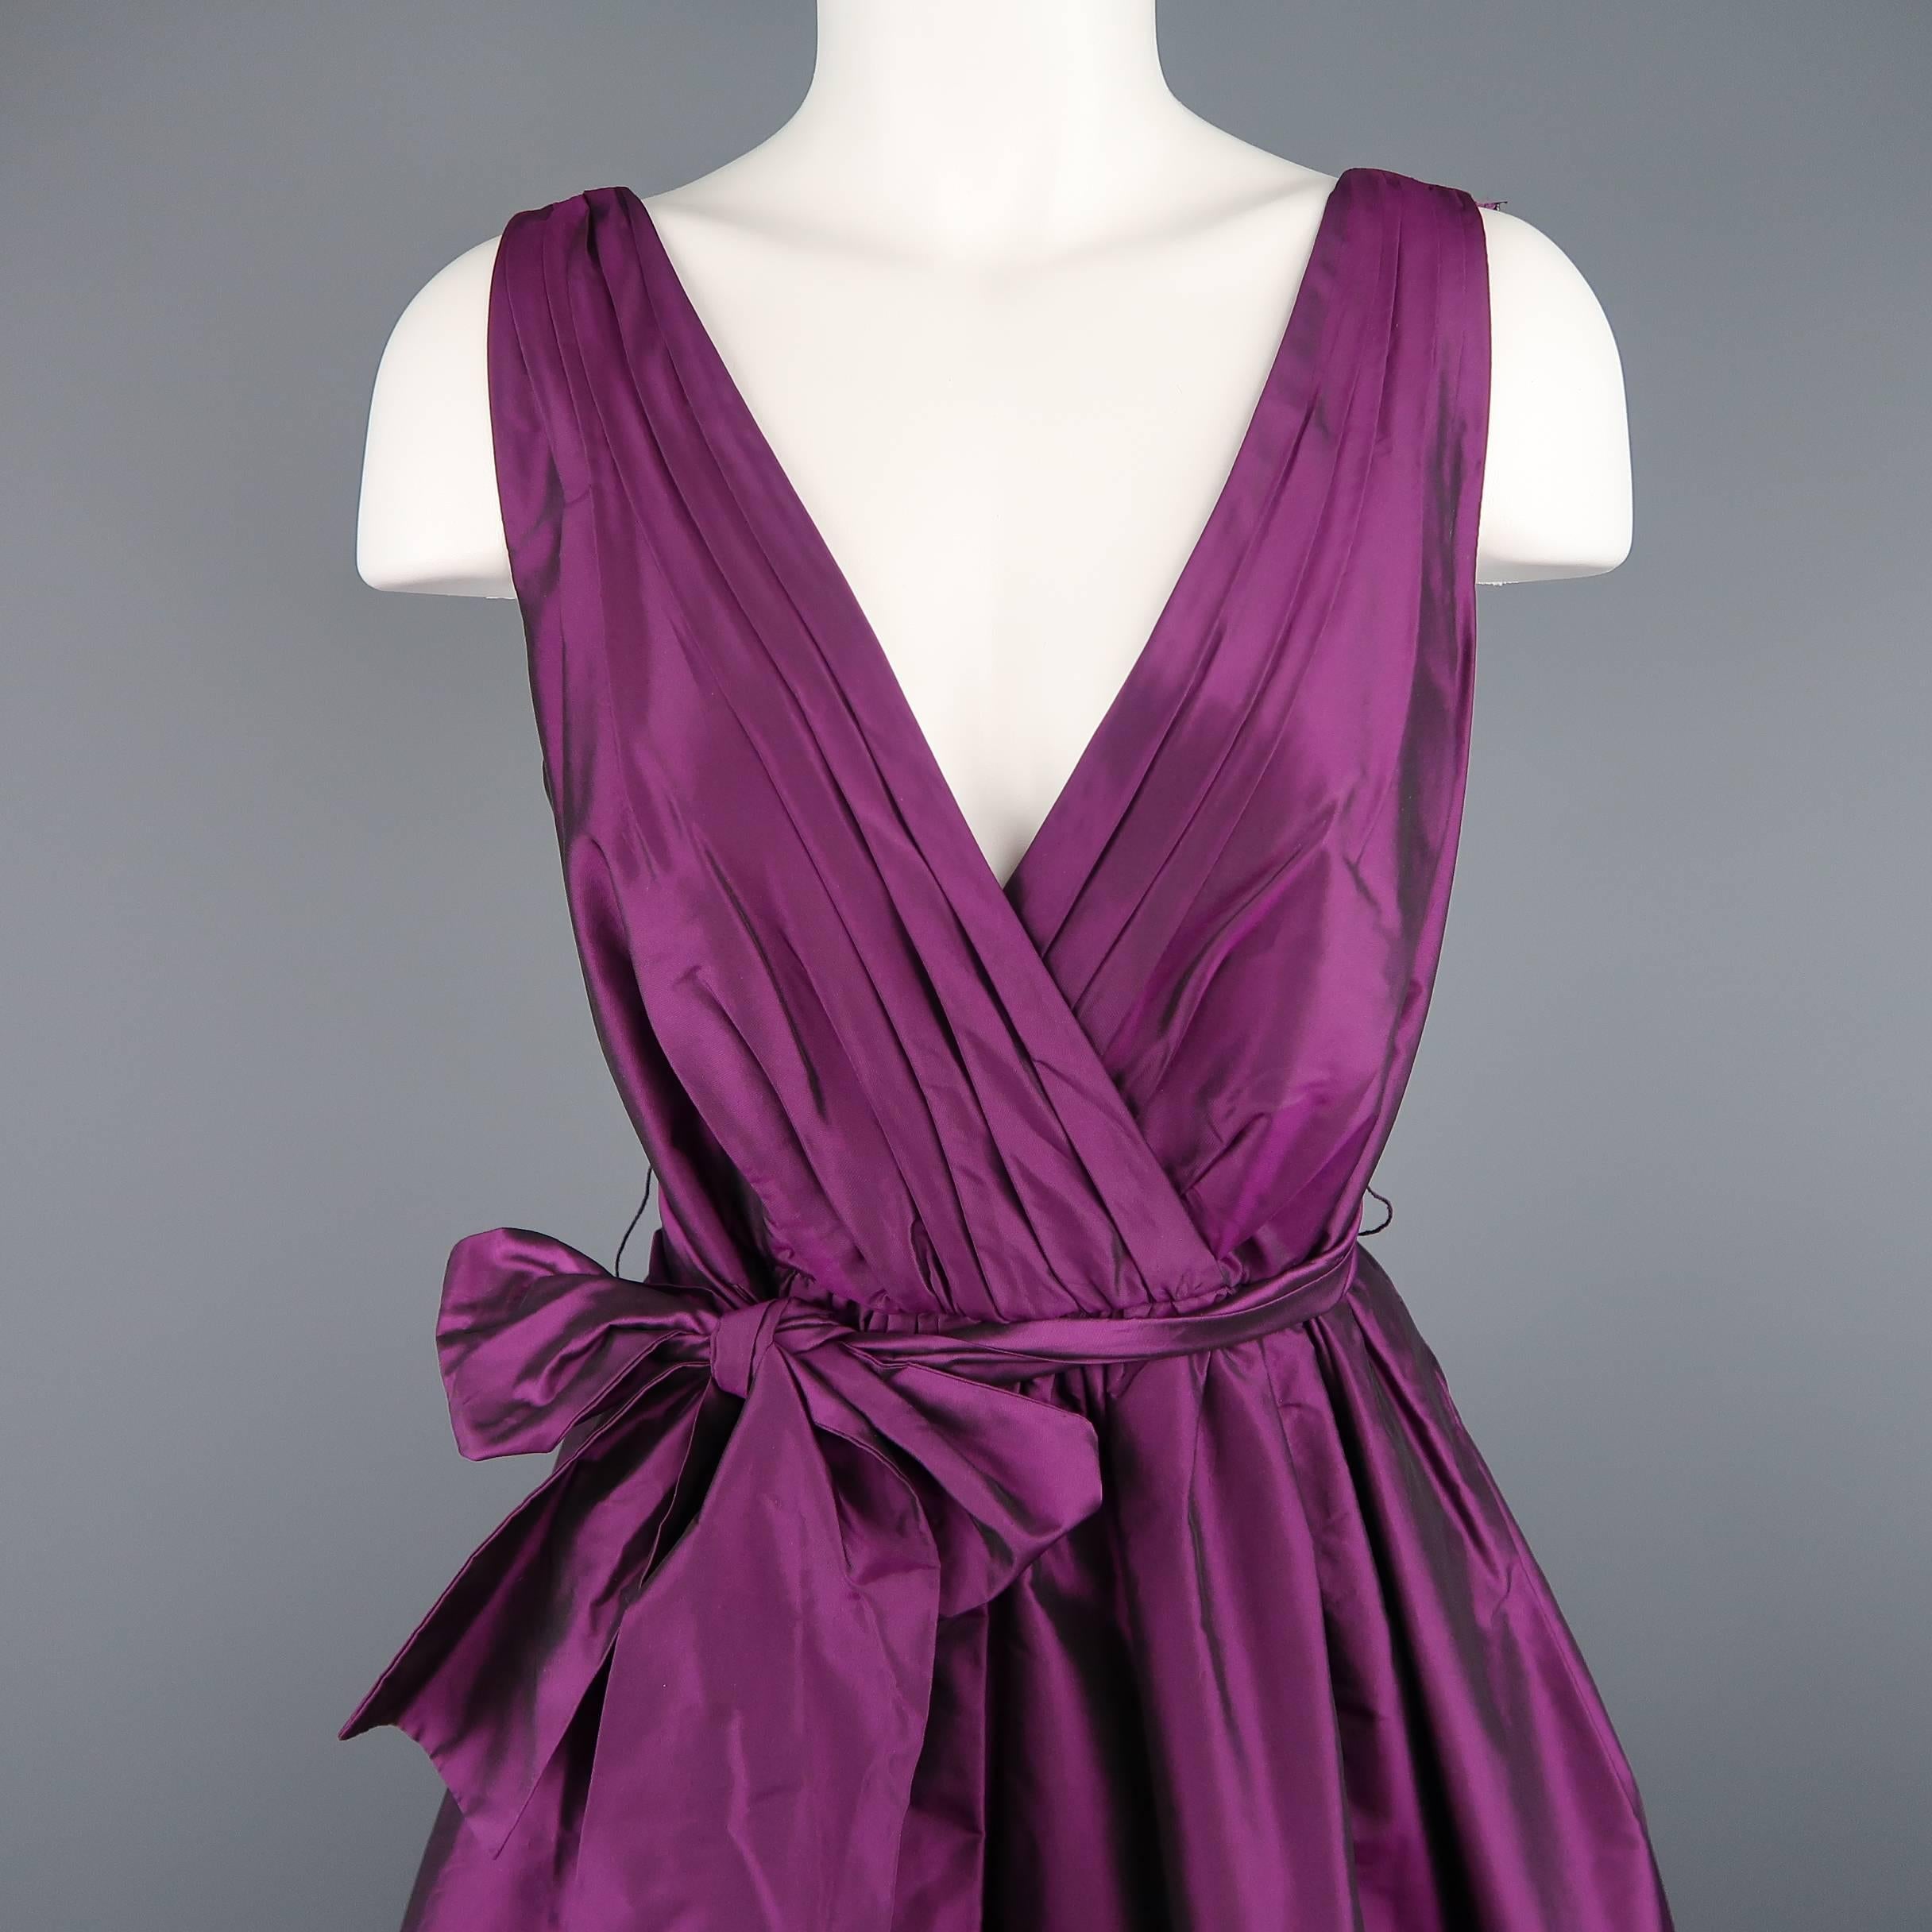 BADGLEY MISCHKA cocktail dress comes in purple silk taffeta with a pleated, wrapped V neck front, sash belt, and full gathered top skirt.
 
New with Tags.
Marked: 6
 
Measurements:
 
Shoulder: 15 in.
Bust: 36 in.
Waist: 28 in.
Hip: 50 in.
Length: 42